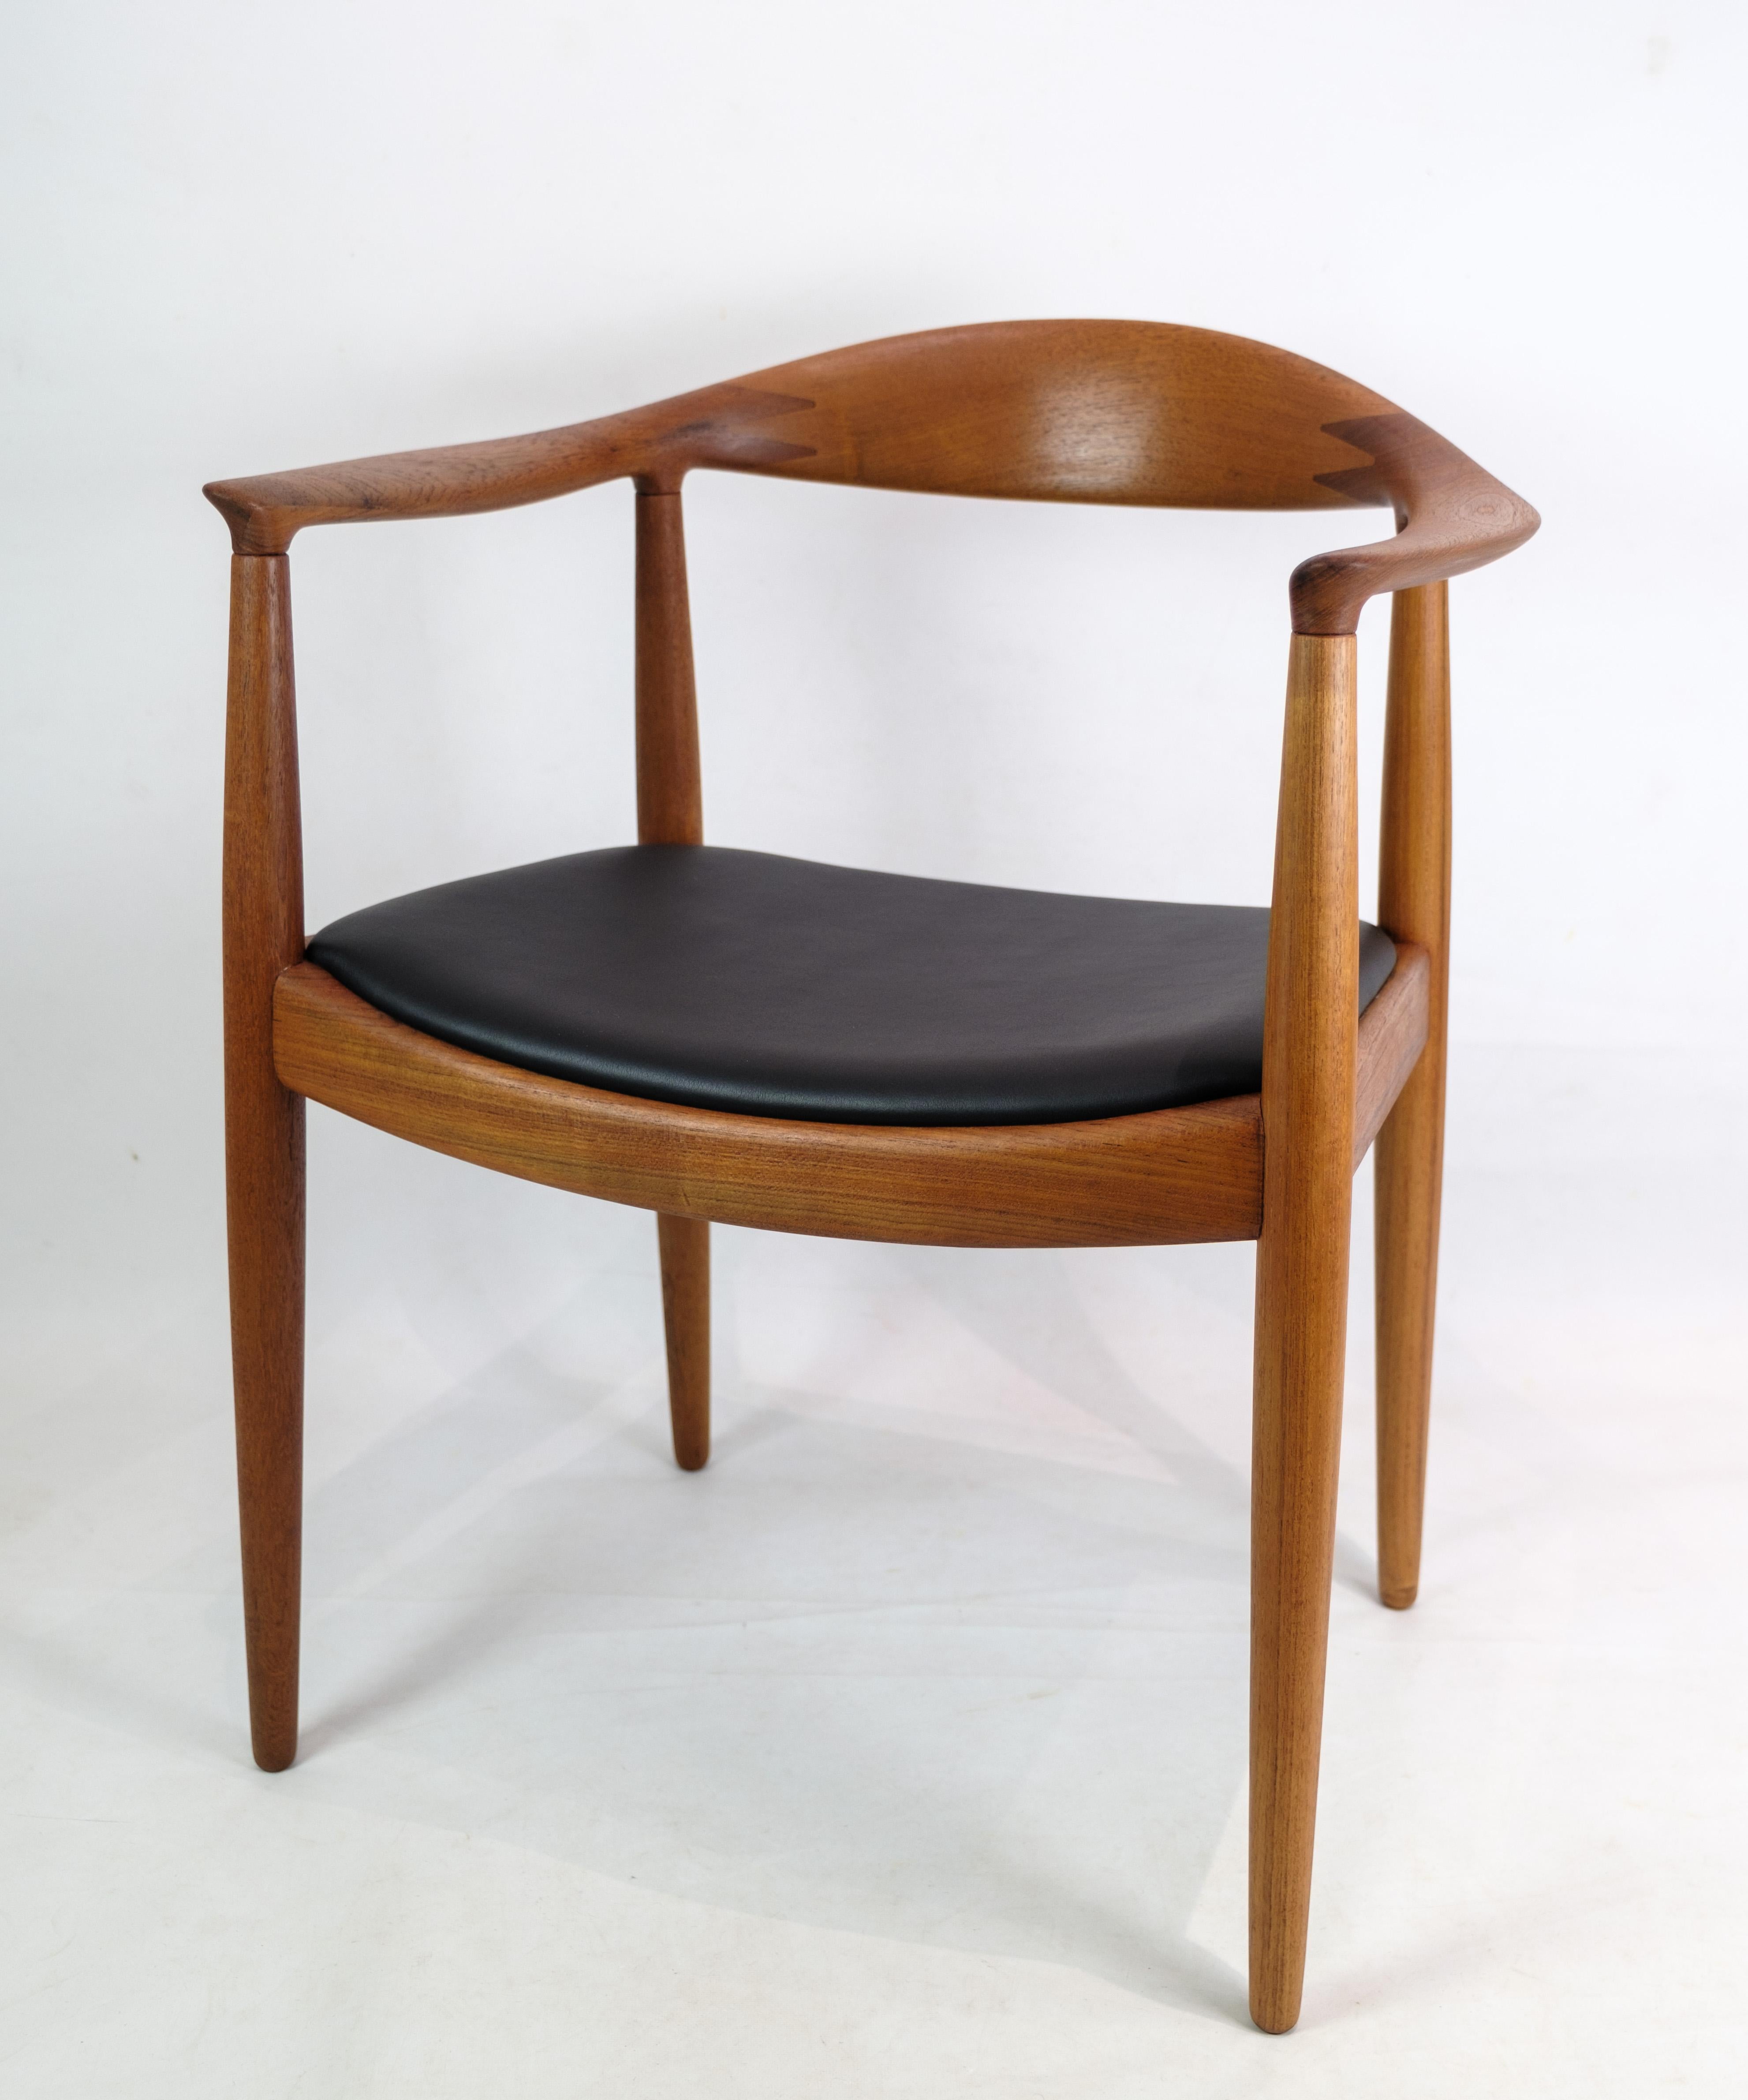 This is a teak and leather chair designed by Hans J. Wegner for Johannes Hansen in the 1950s. The model JH 503 is known as 